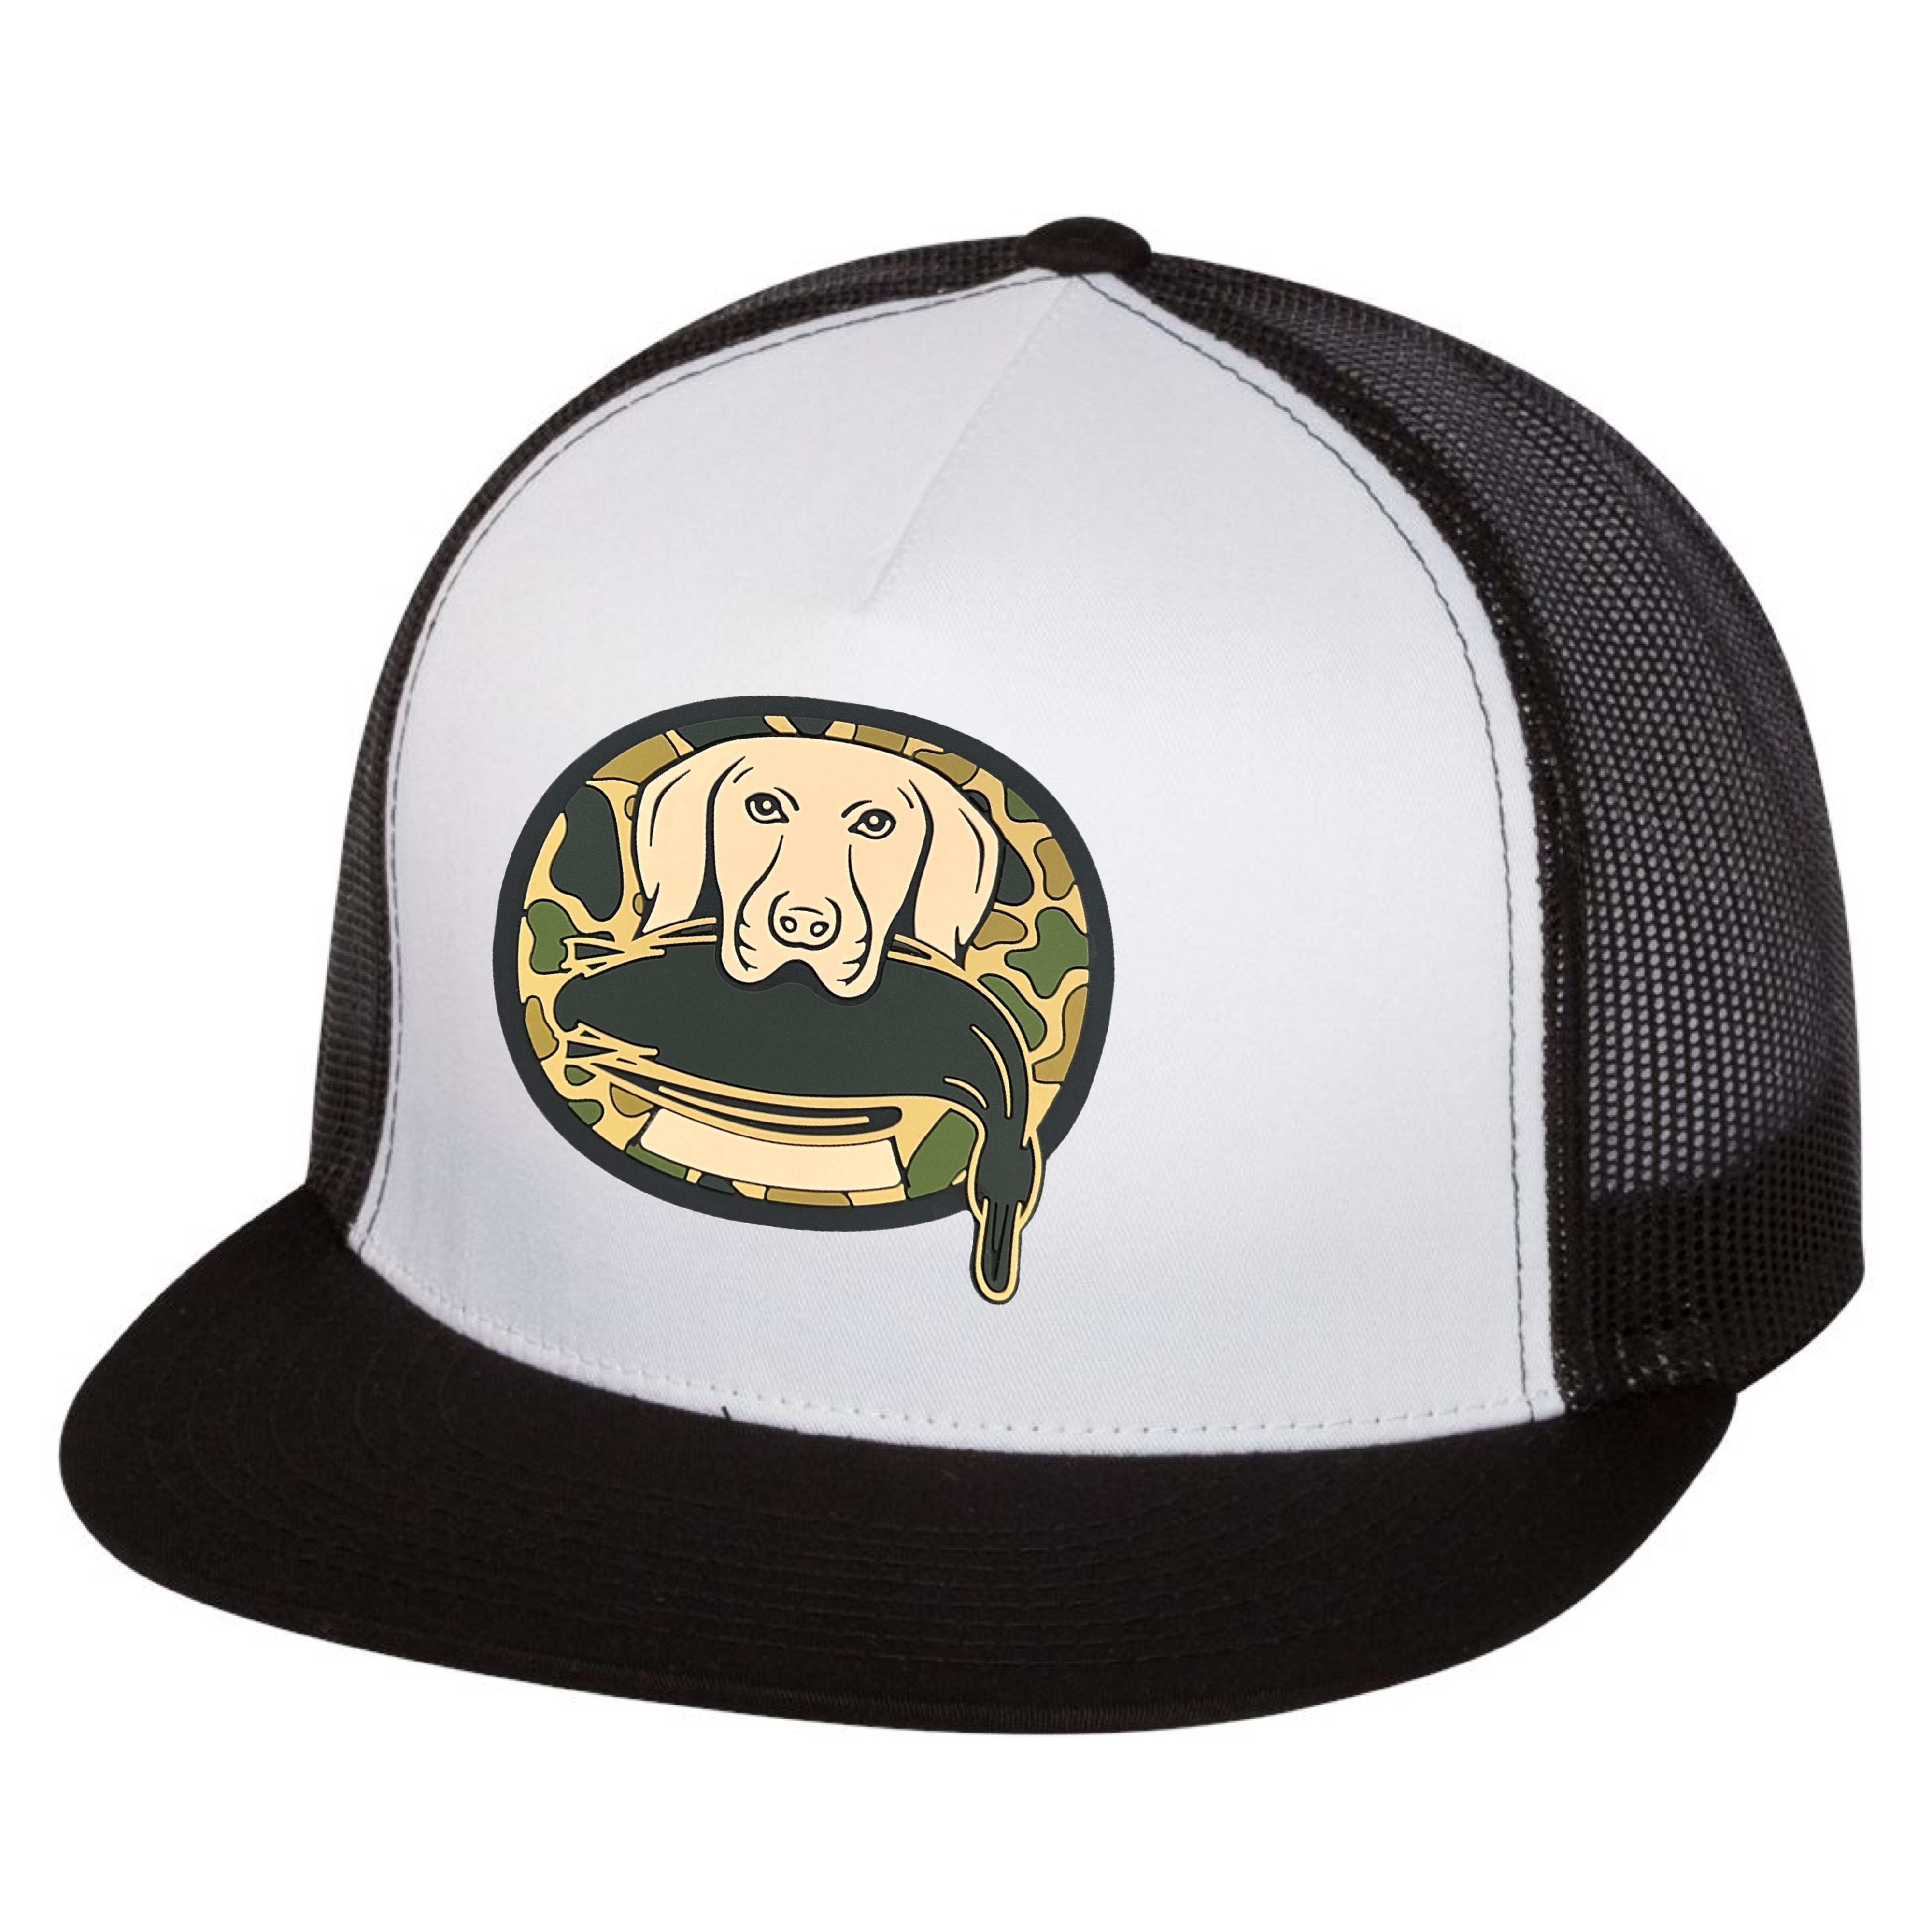 Reach “Cigar City” Rays Fitted Hat – REACHTPA